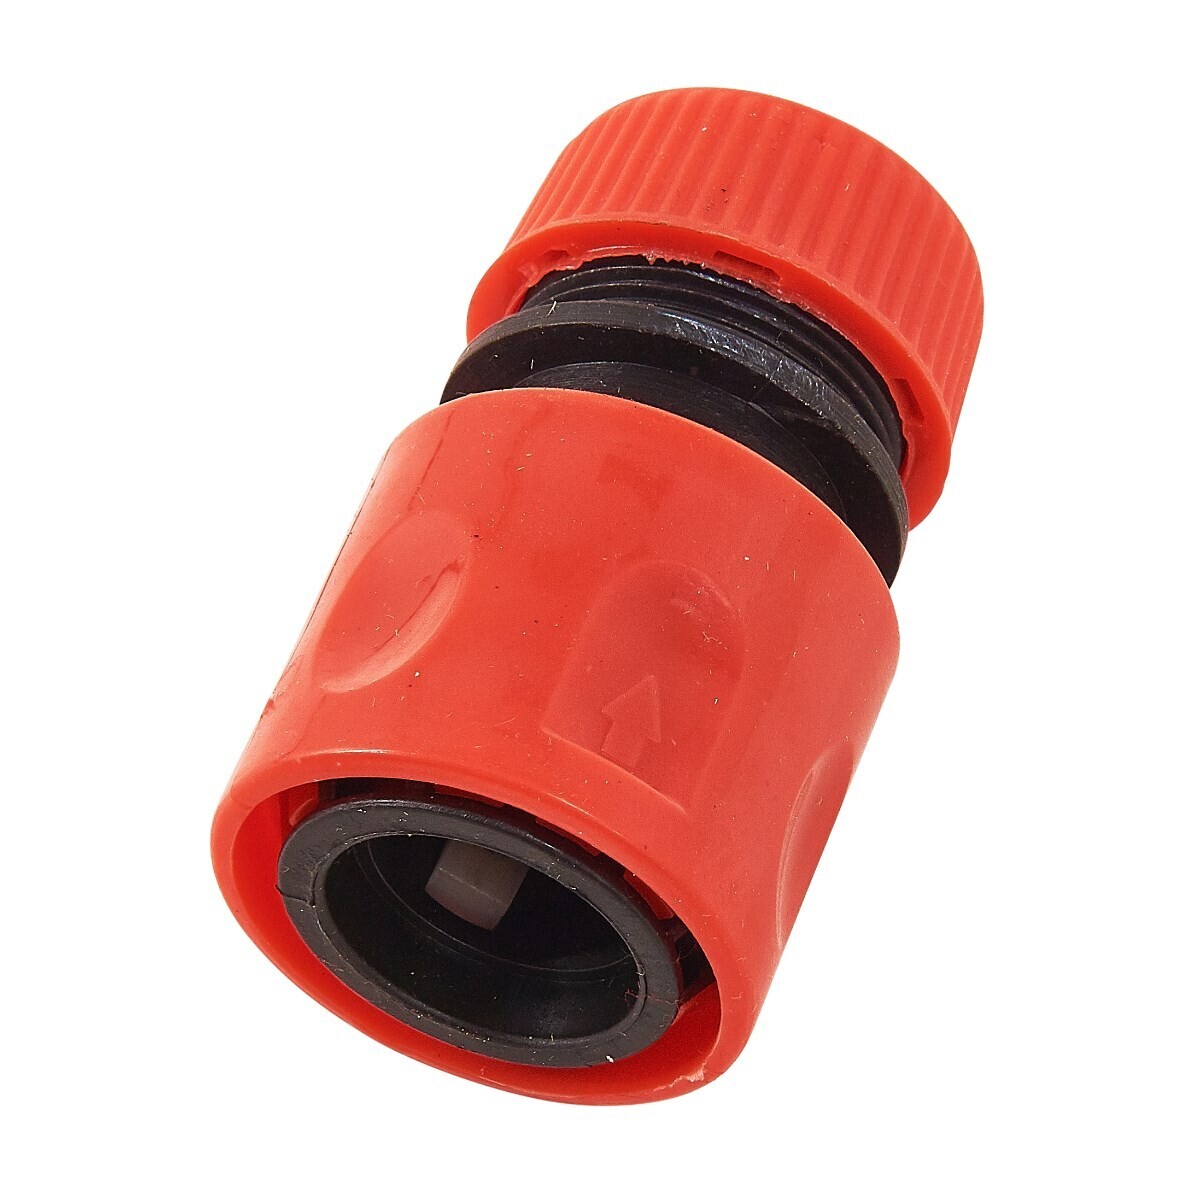 1/2” hose connector with shut off